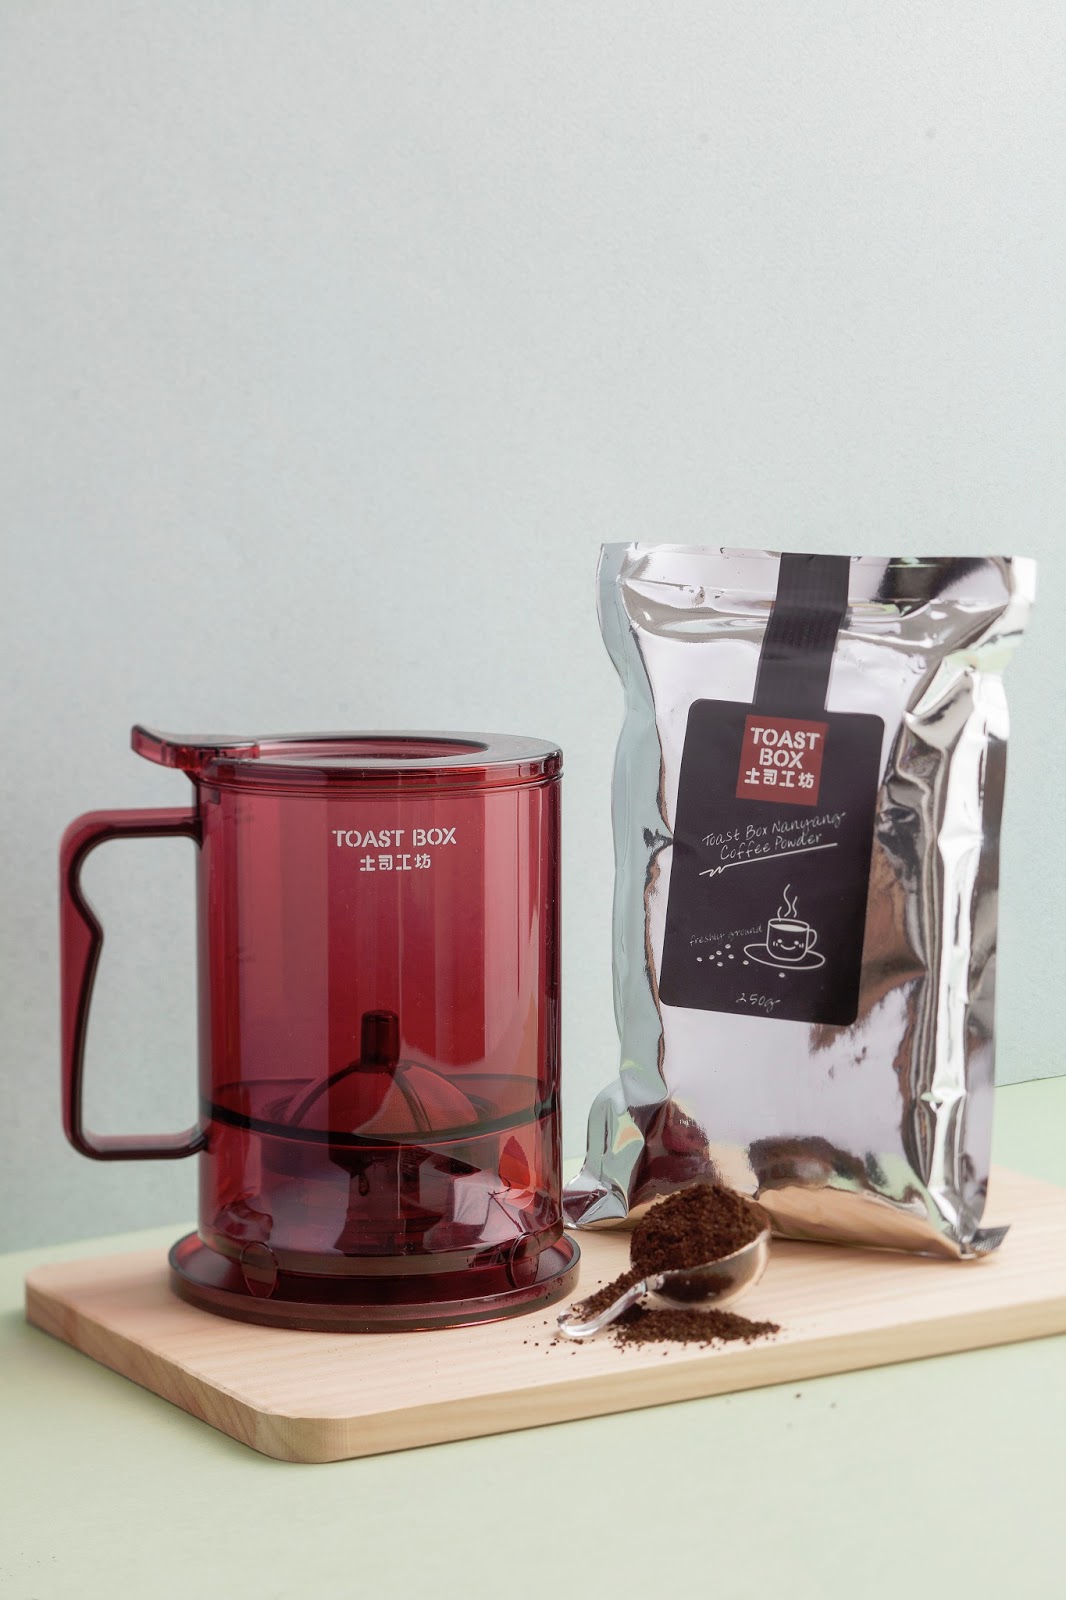 Cherry Berry : Lim Kopi for a Cause by Toast Box